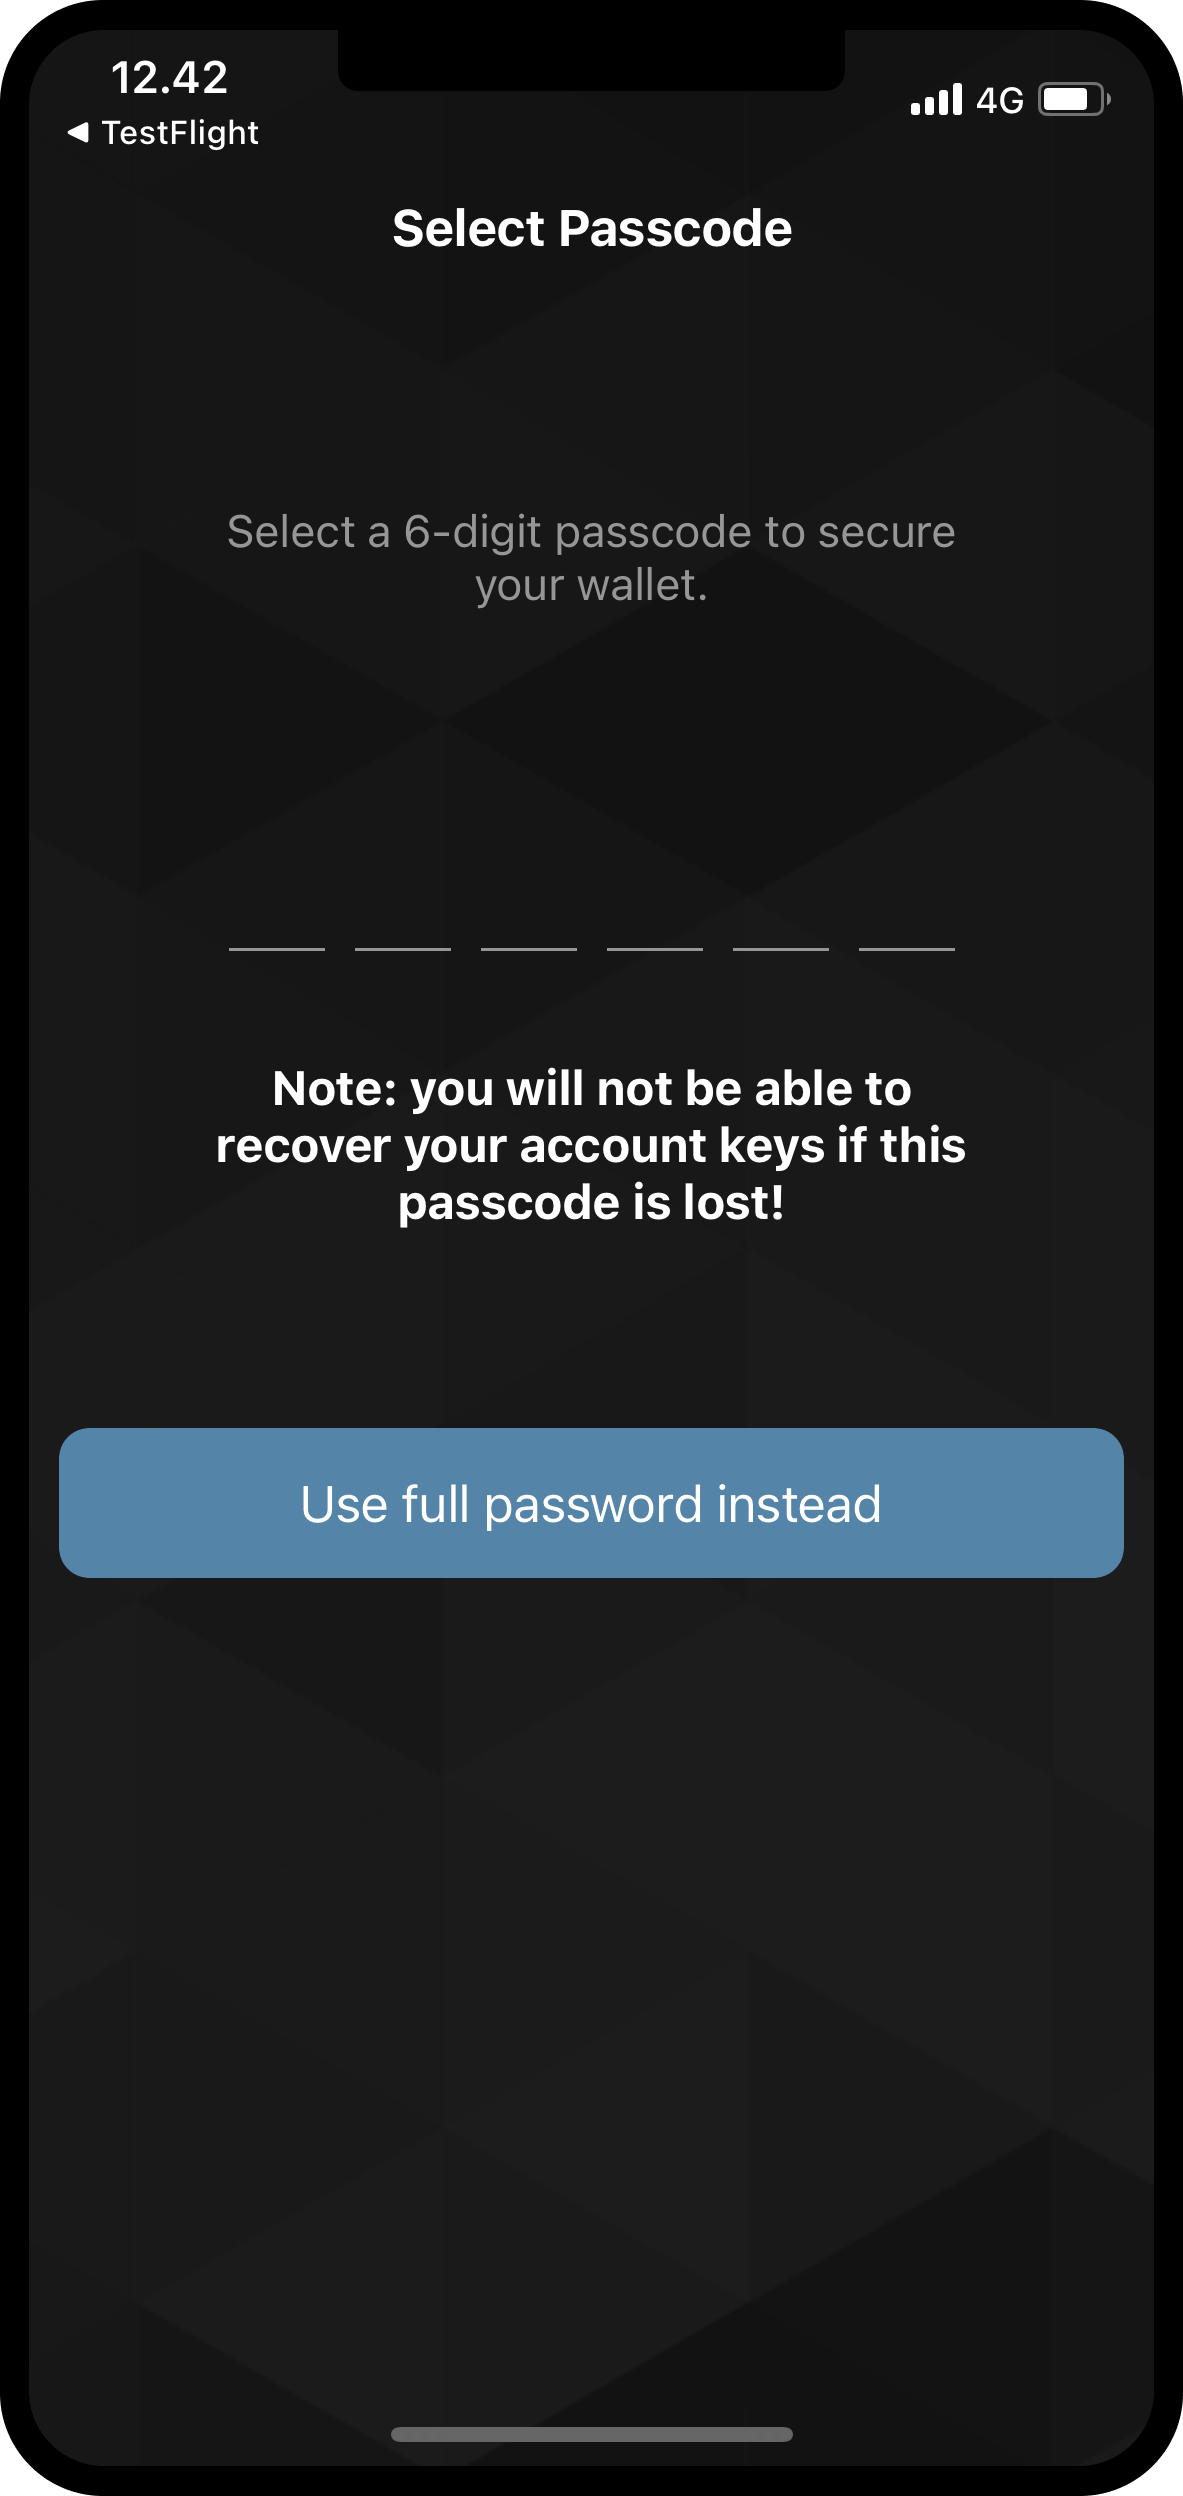 screen to enter six digit passcode or enter a full password